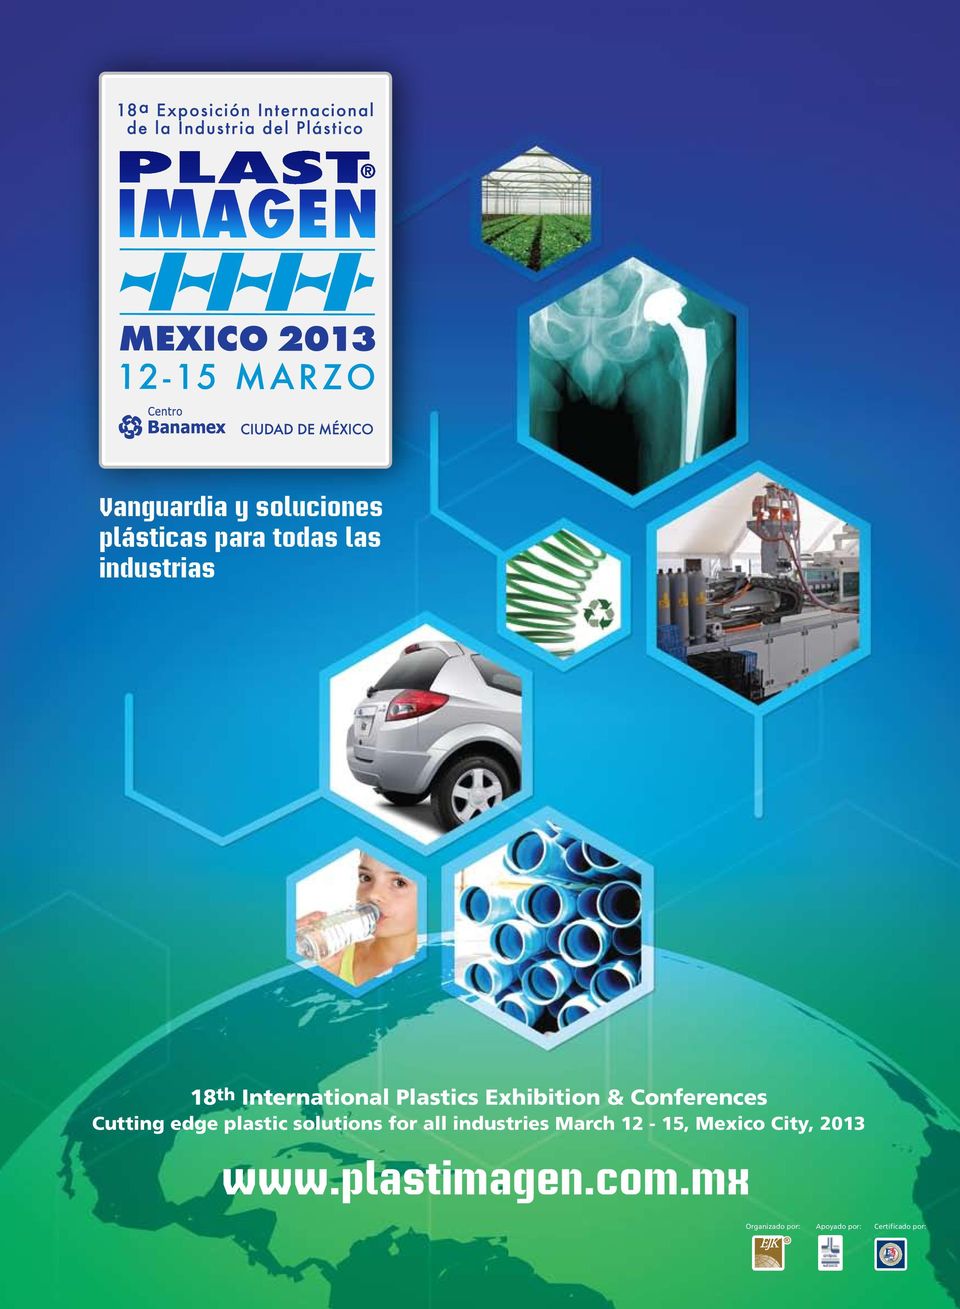 plastic solutions for all industries March 12-15, Mexico City,